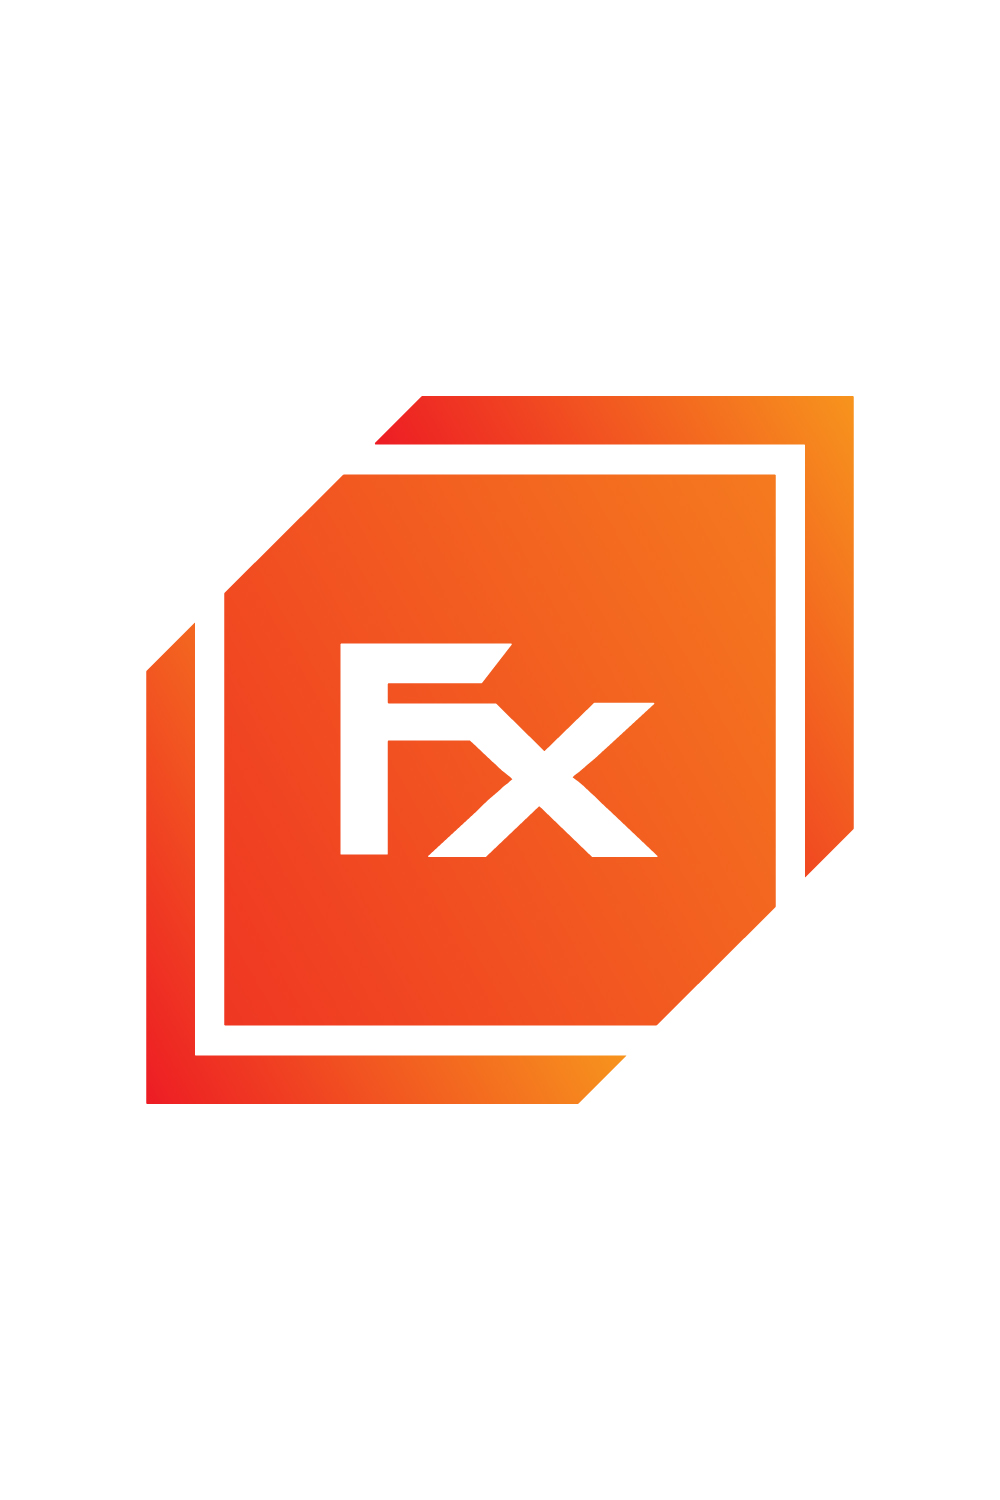 Initials FX letters logo design vector template arts XF logo orange and white color icon FX best company identity pinterest preview image.